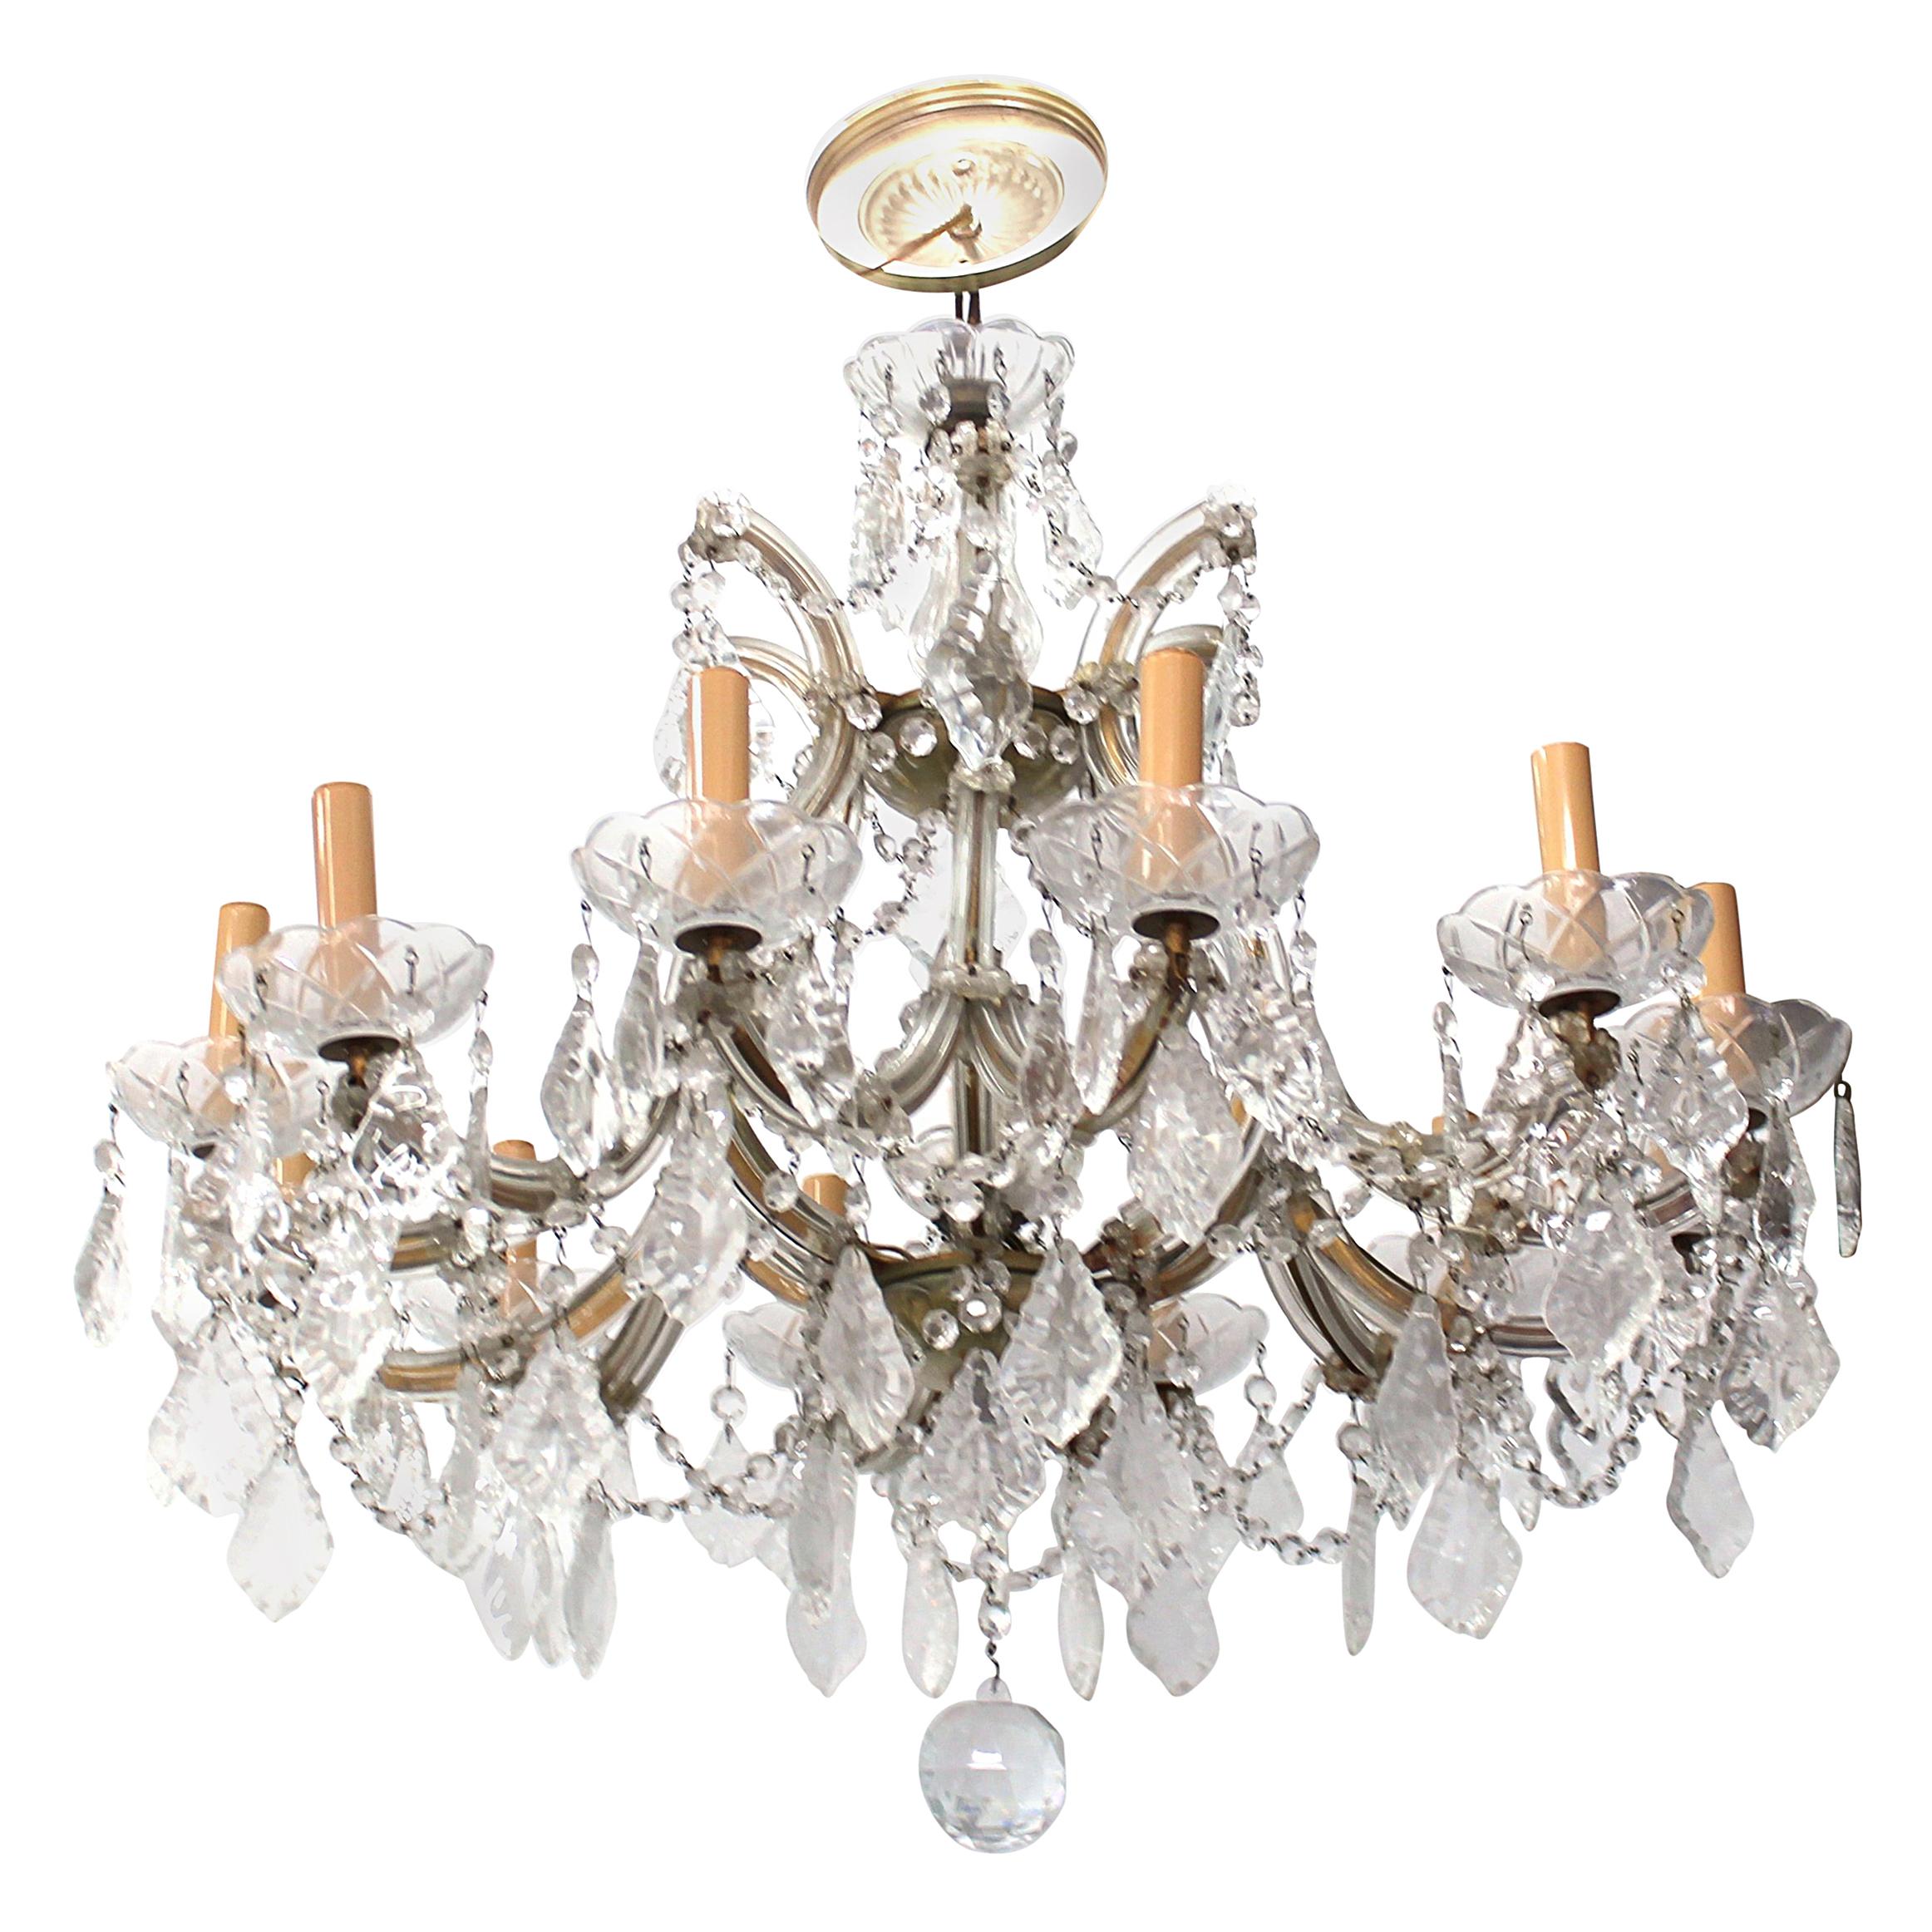 Chandelier with Twelve Arms and Crystal Ornaments